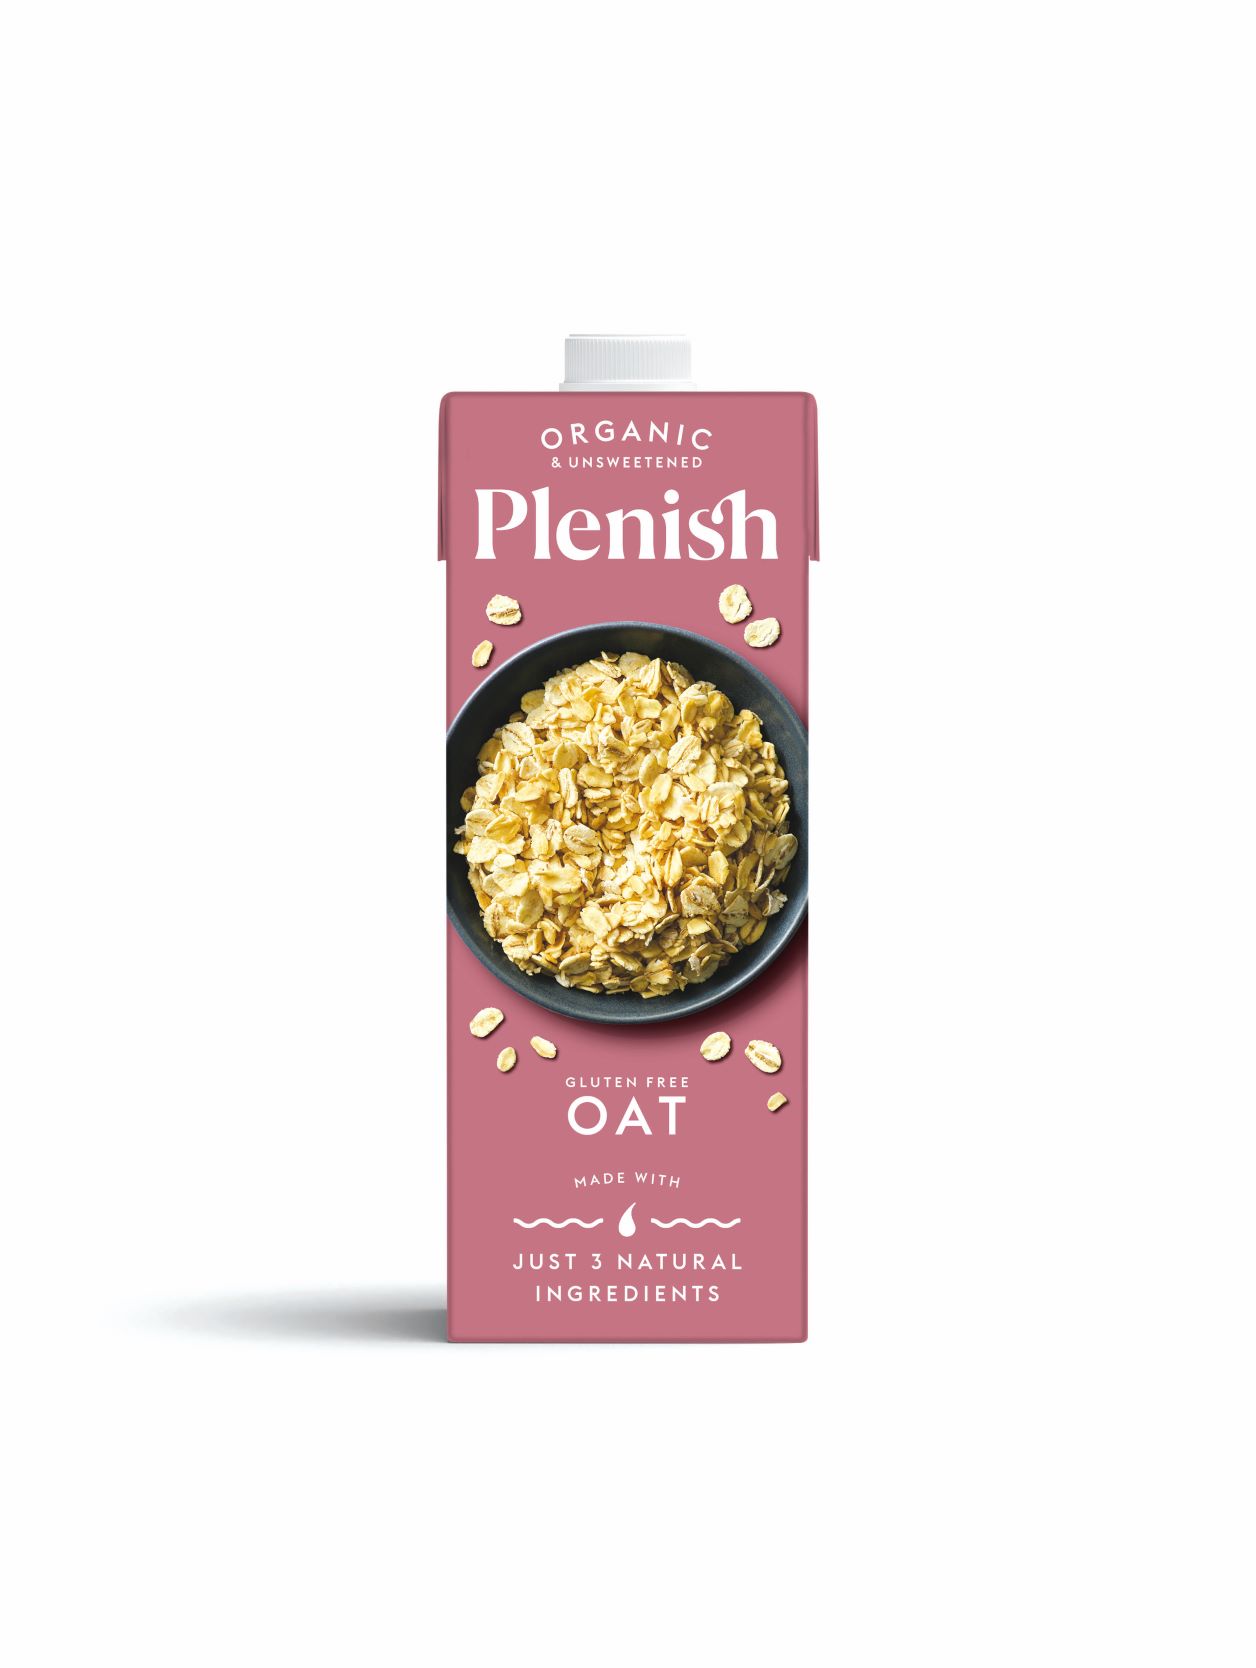 cut out image showing pink carton of plenish natural oat milk